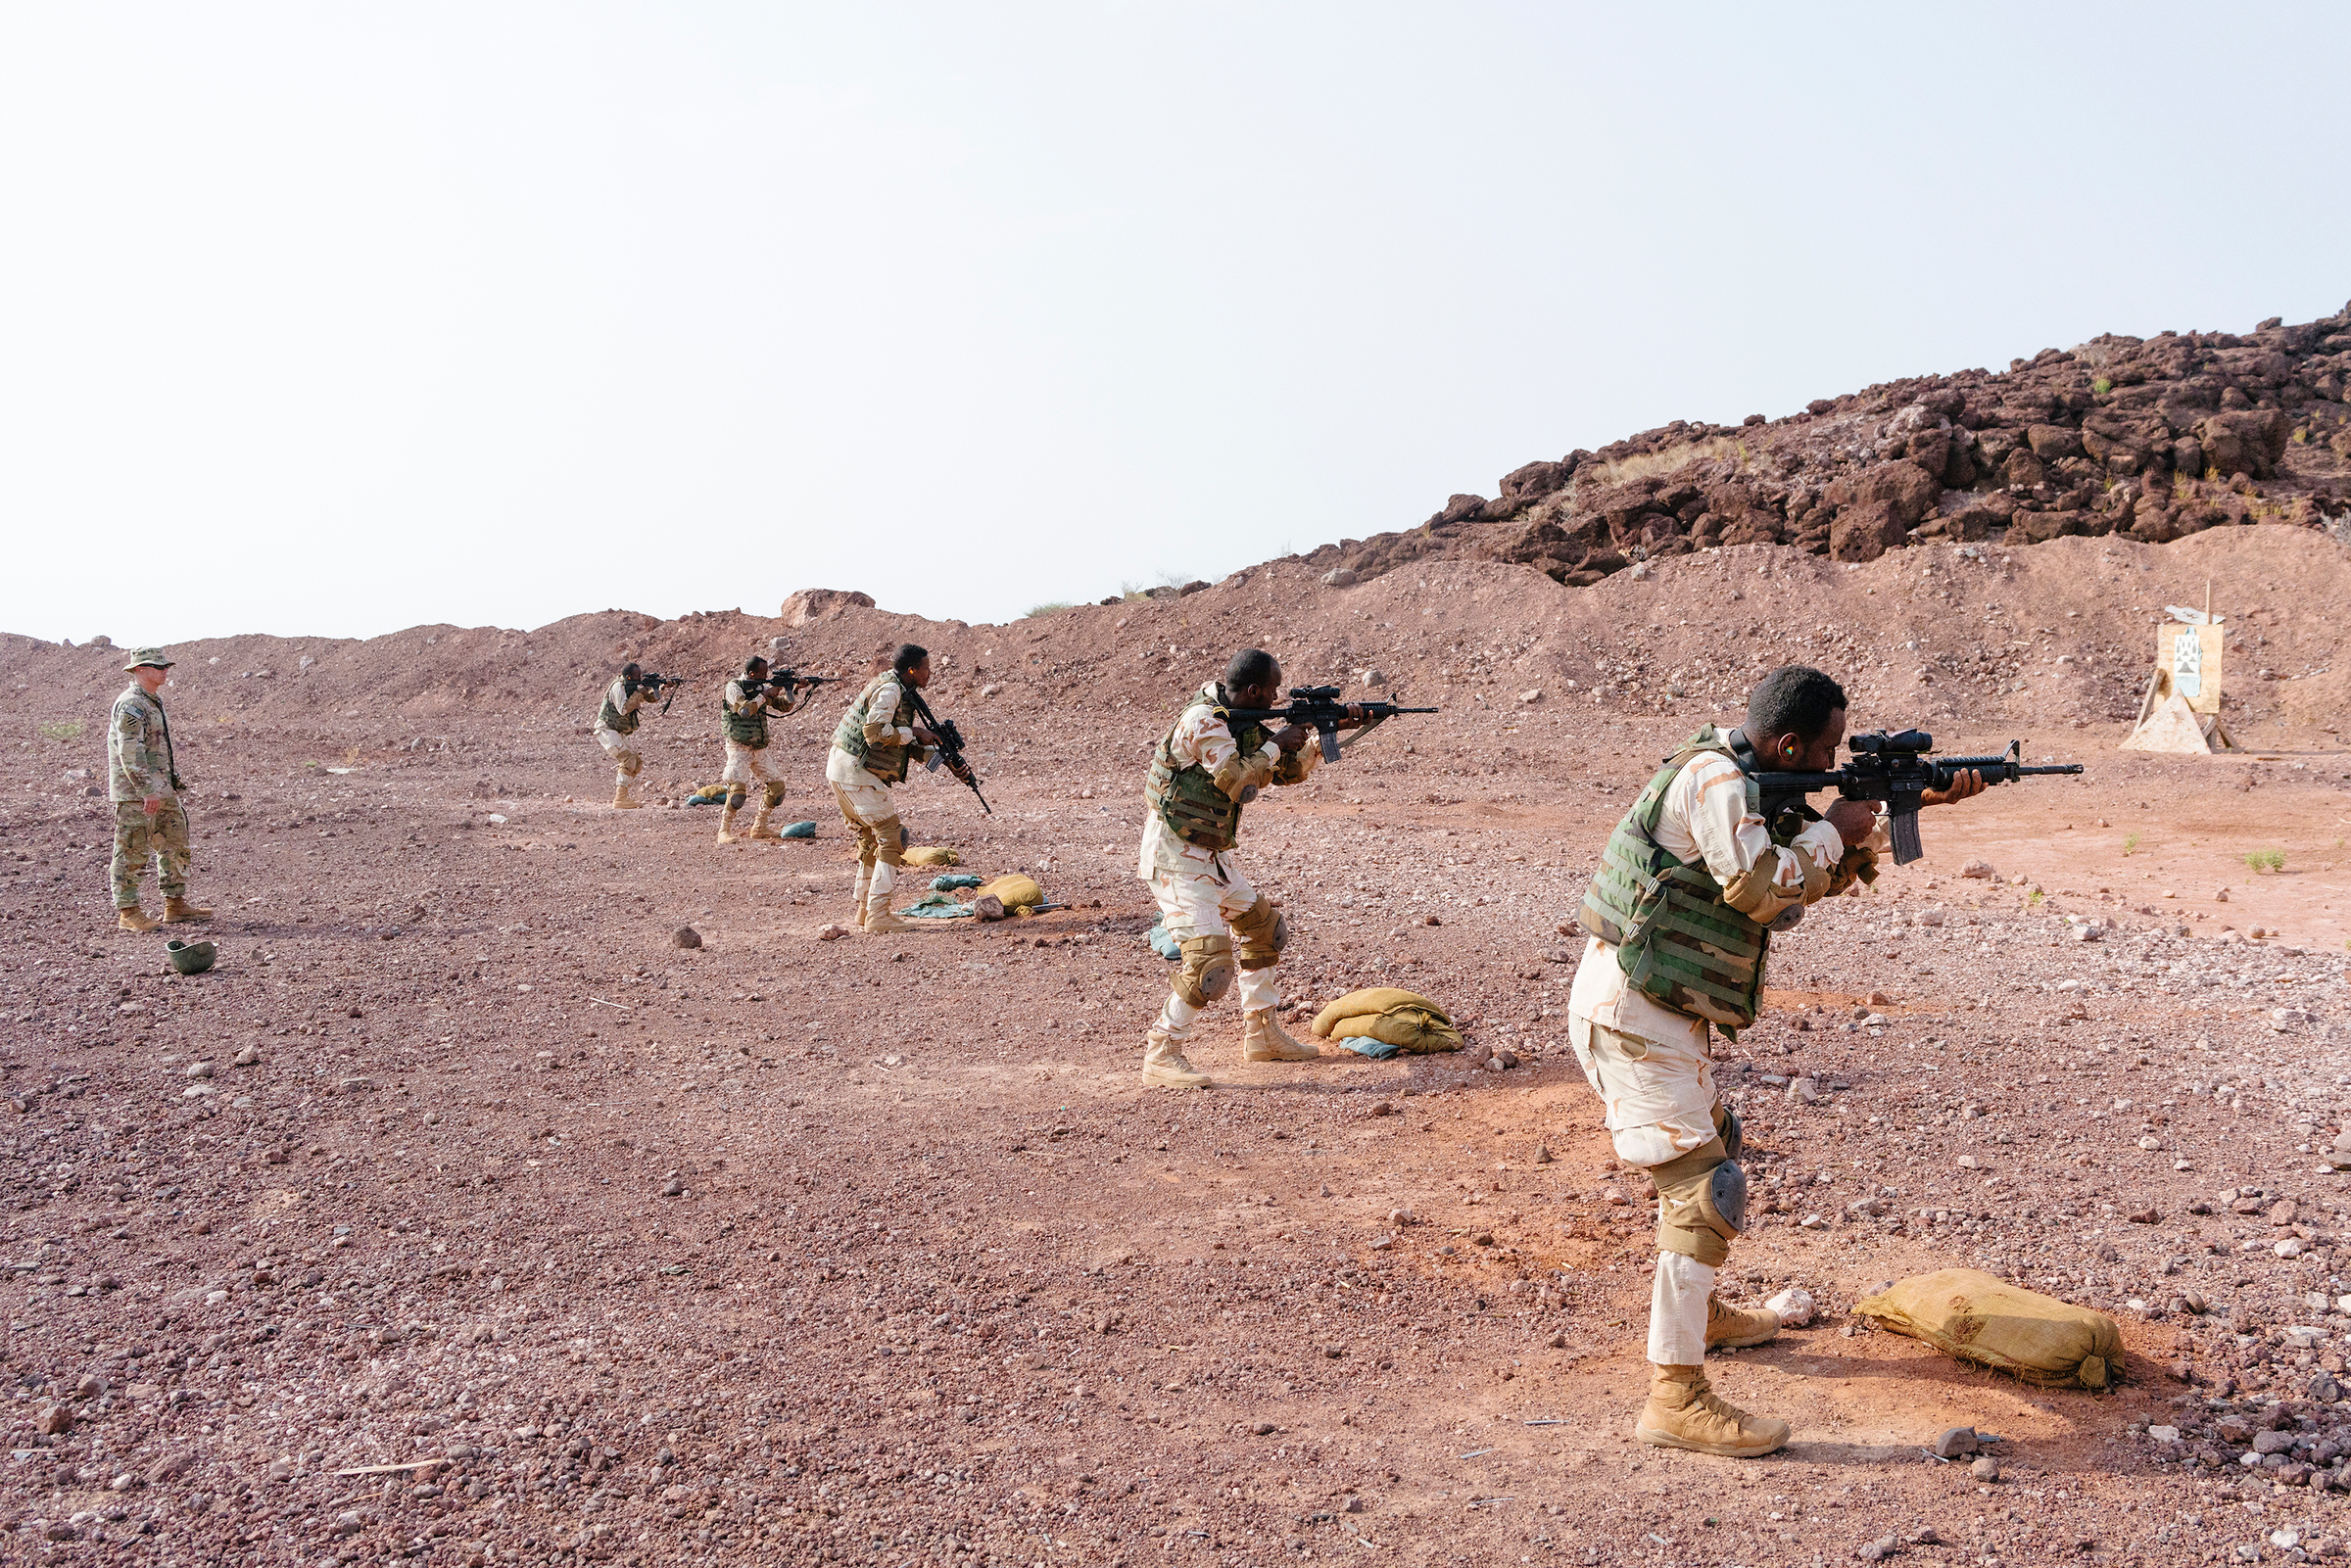 U.S. soldiers oversee marksmanship training of the Djiboutian Bataillon d’Intervention Rapide, an infantry unit equipped with American weaponry. (Emanuele Satolli for TIME)